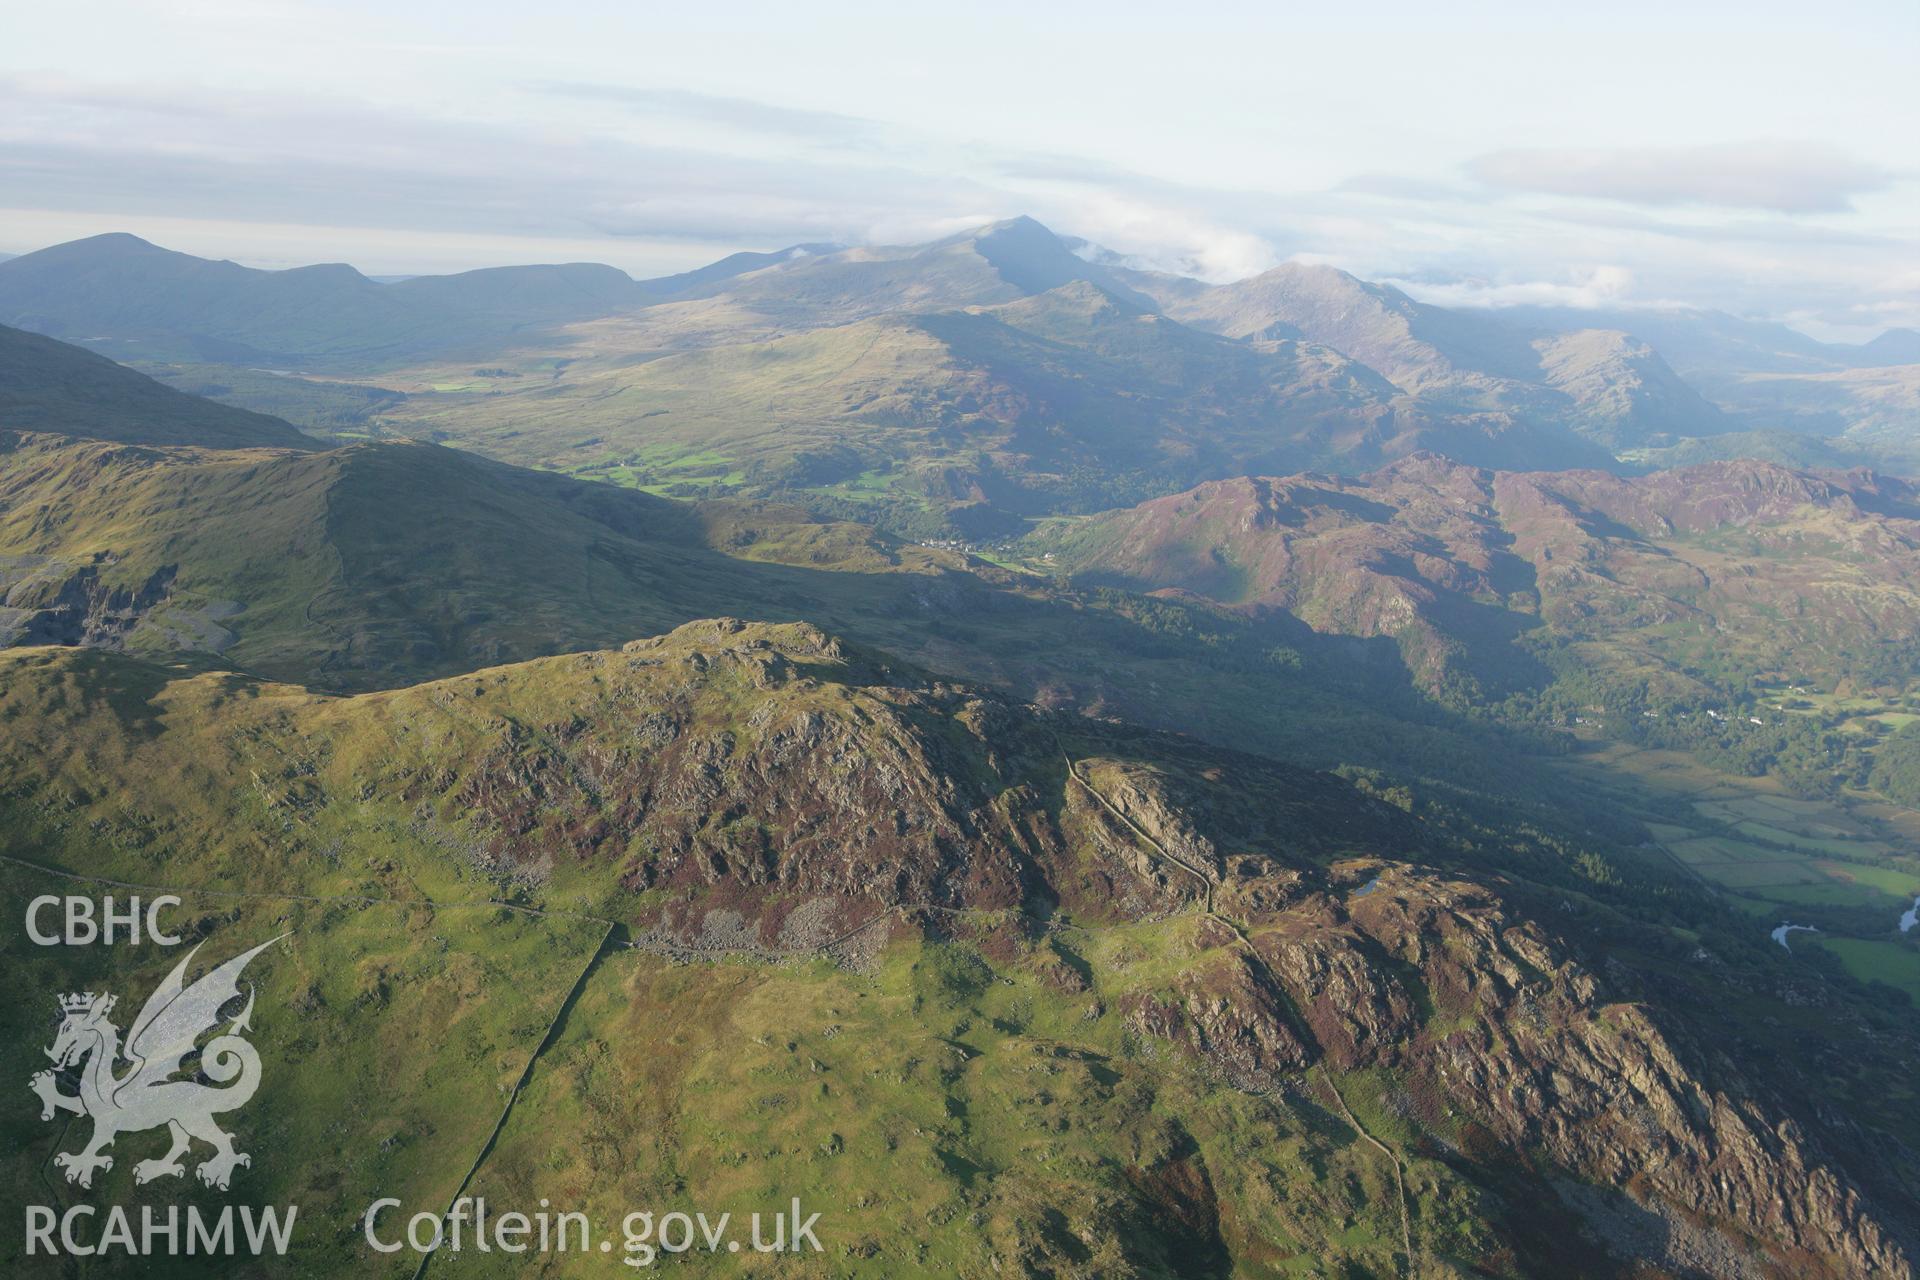 RCAHMW colour oblique aerial photograph of Snowdonia. Taken on 06 September 2007 by Toby Driver